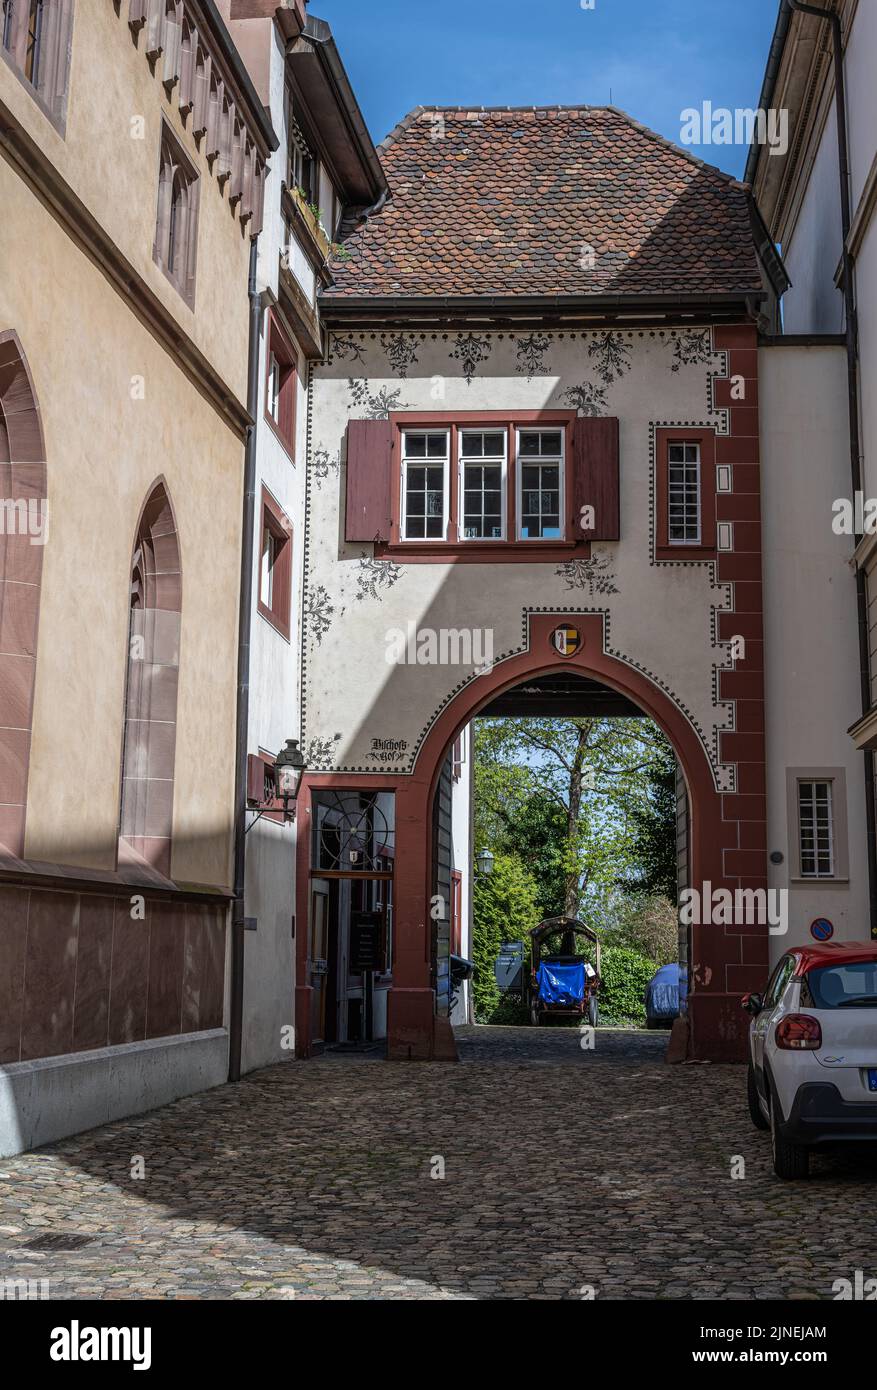 Medieval building, Rittergasse, Basel Stock Photo